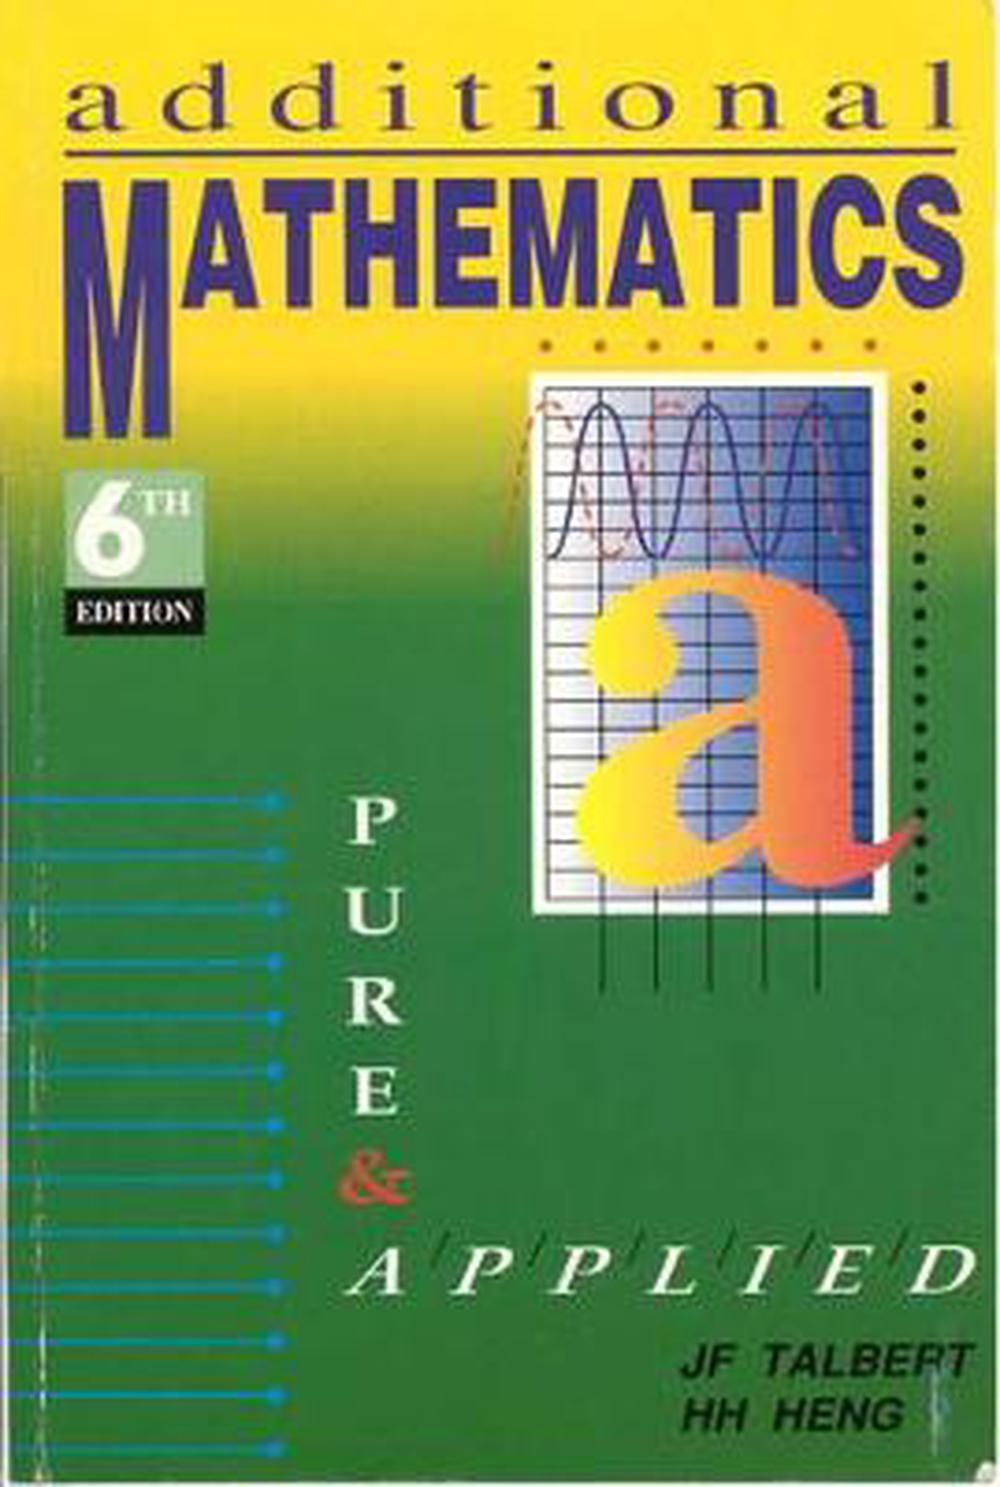 Additional Mathematics, Pure and Applied 6E by A. Godman, Paperback ...